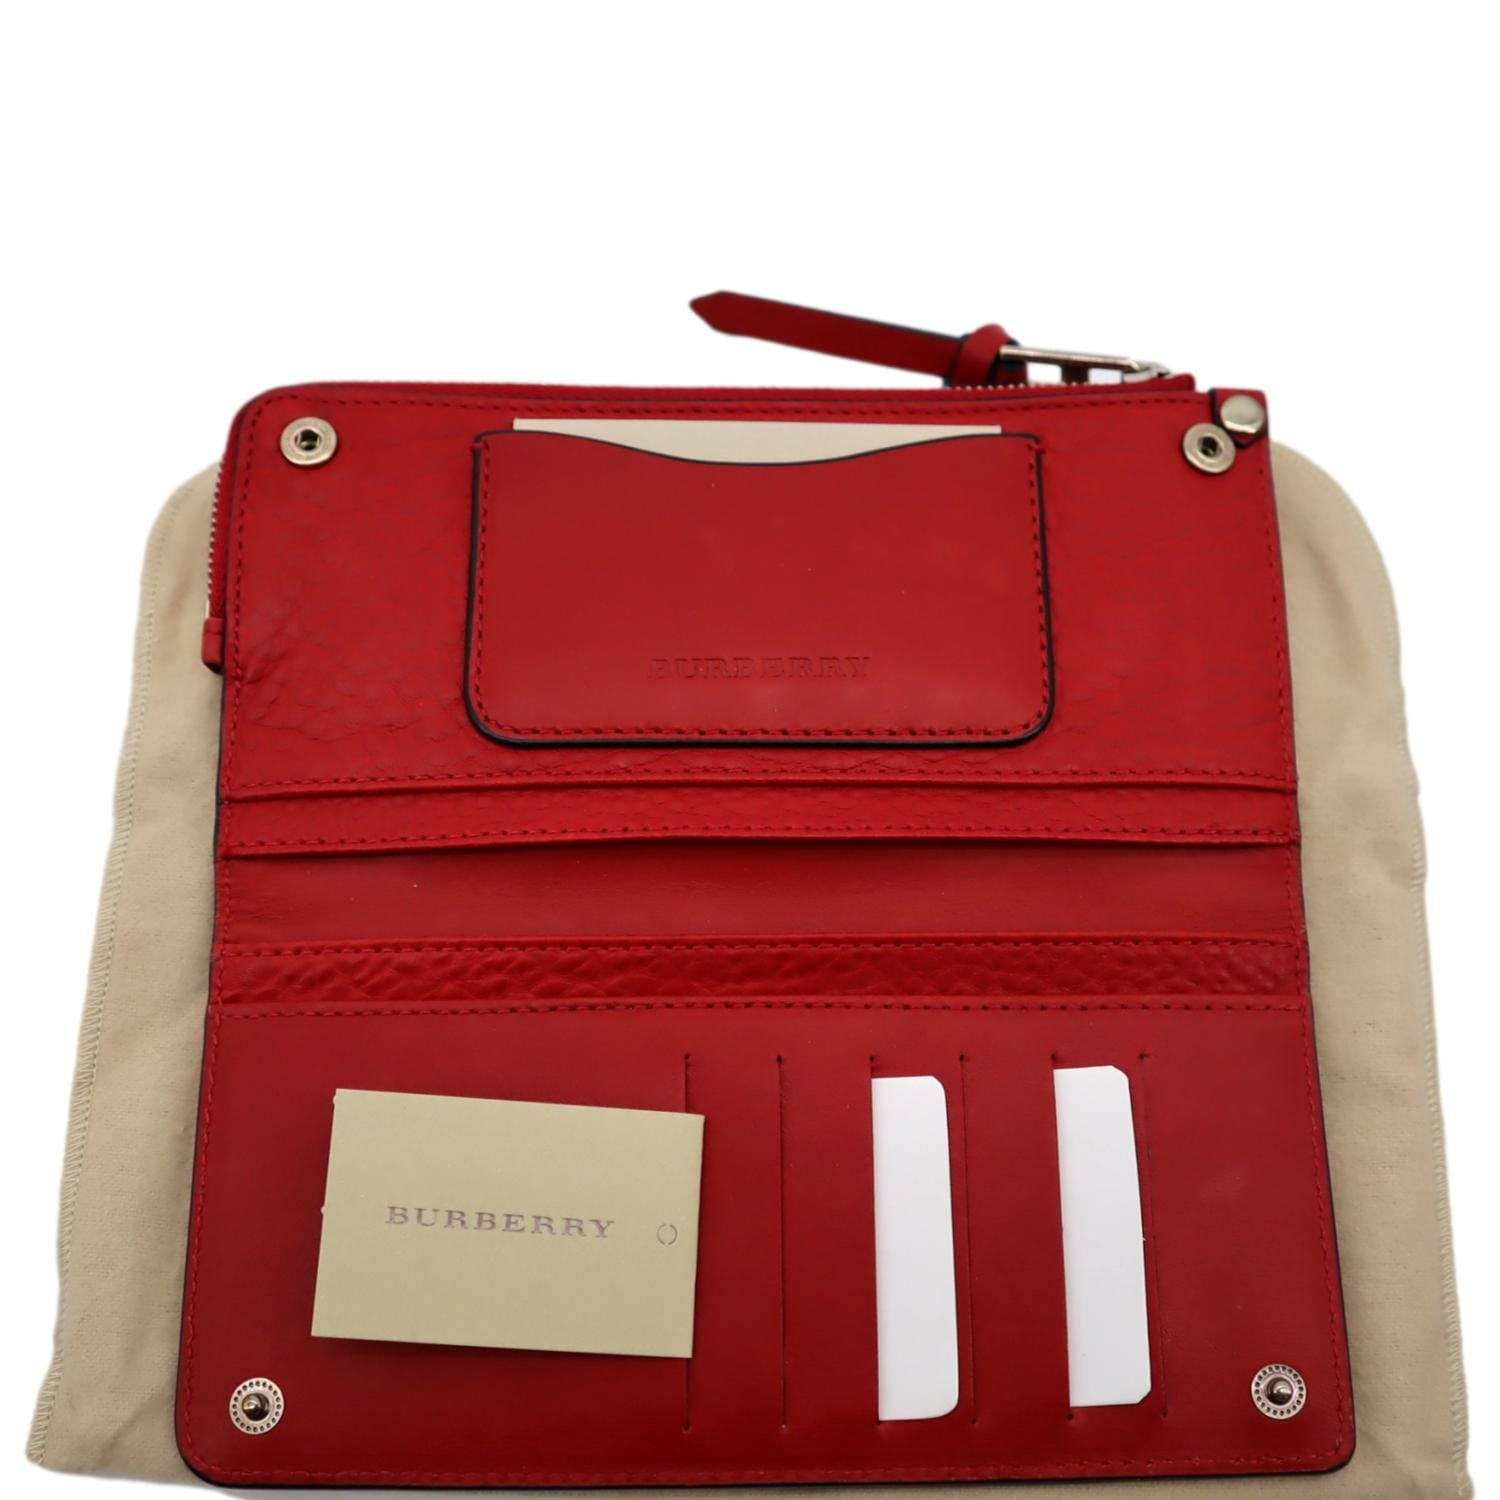 Burberry Wallets in Red